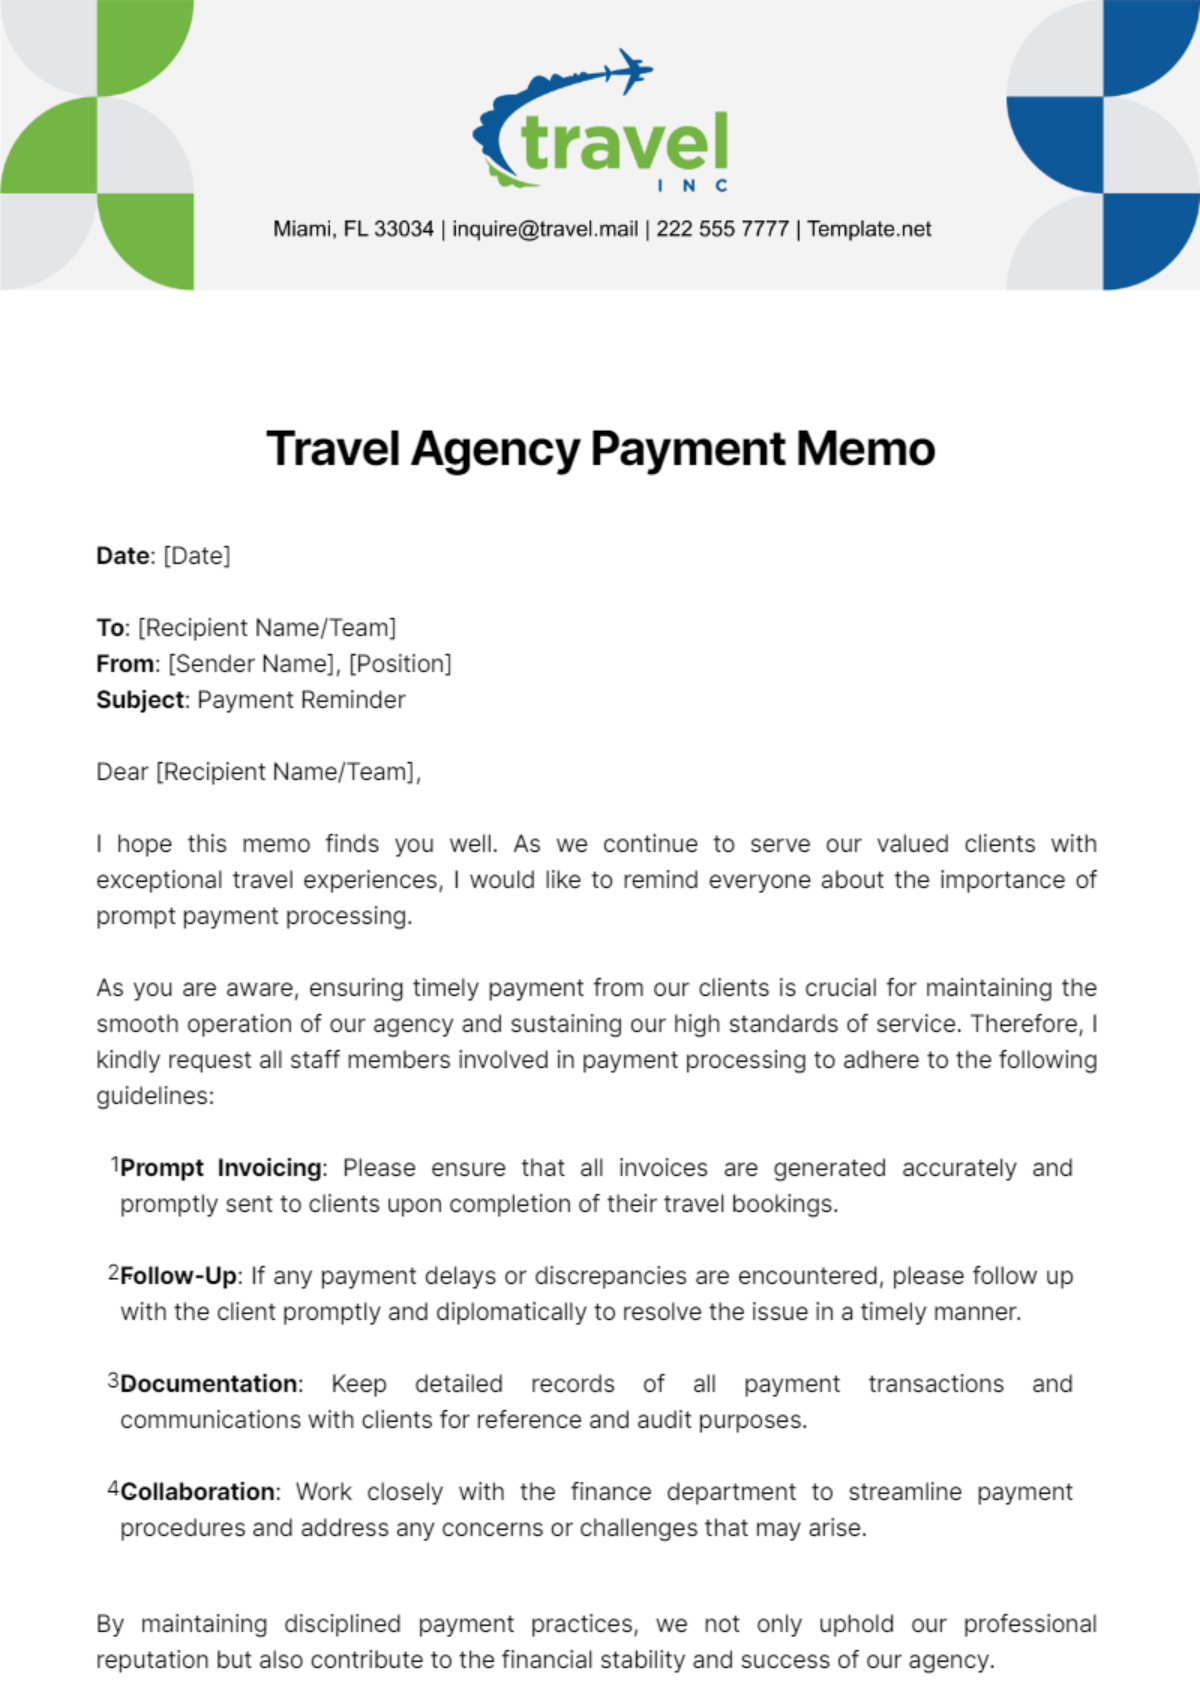 Travel Agency Payment Memo Template